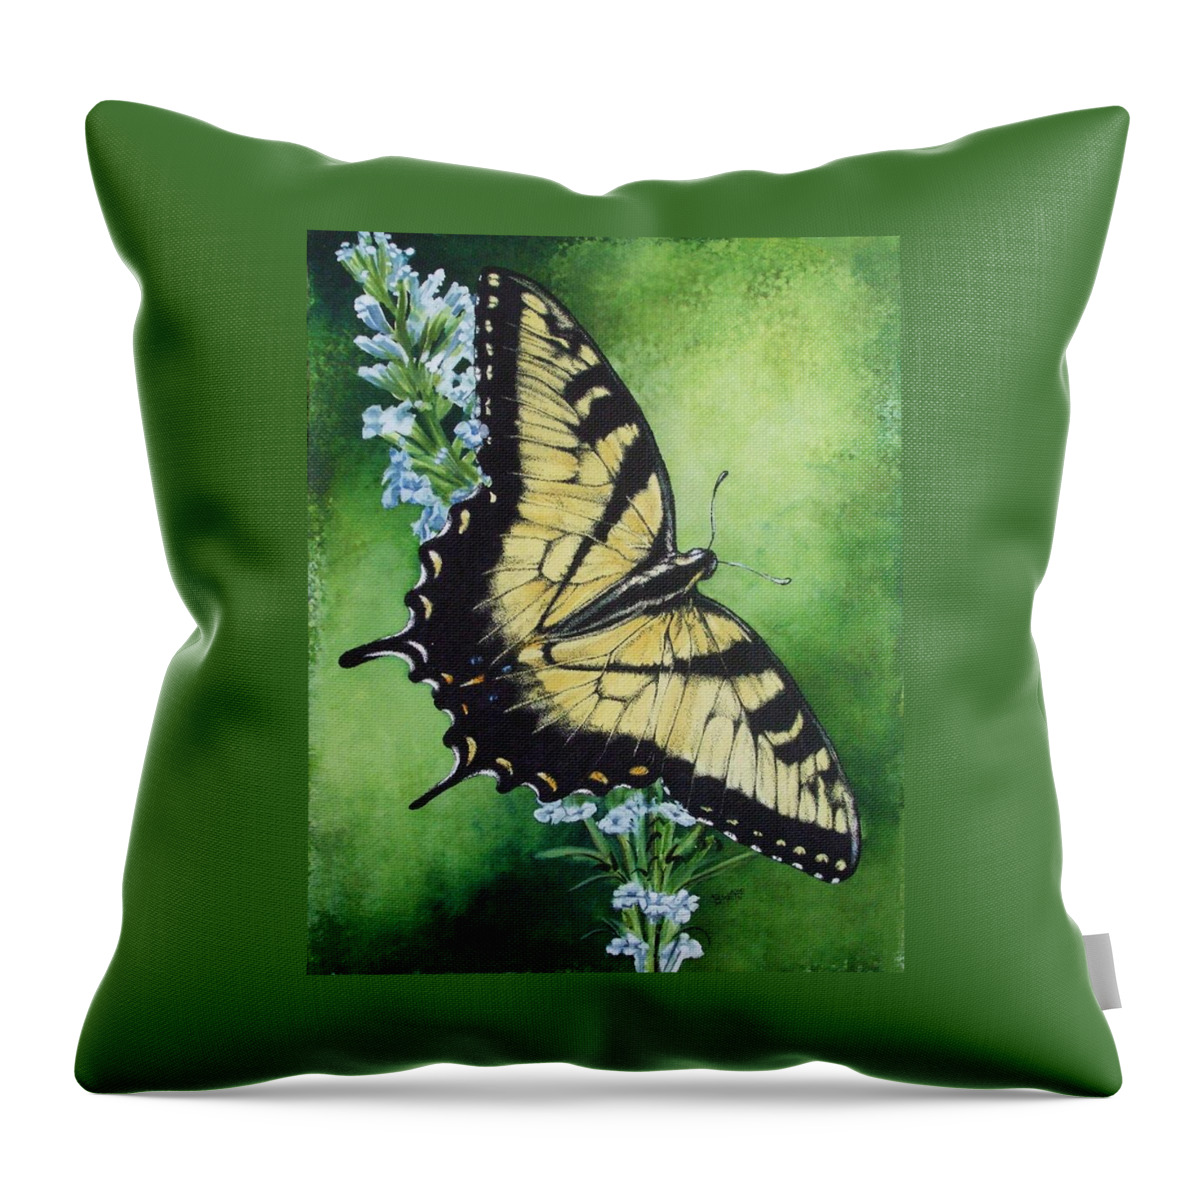 Bugs Throw Pillow featuring the mixed media Fragile Beauty by Barbara Keith